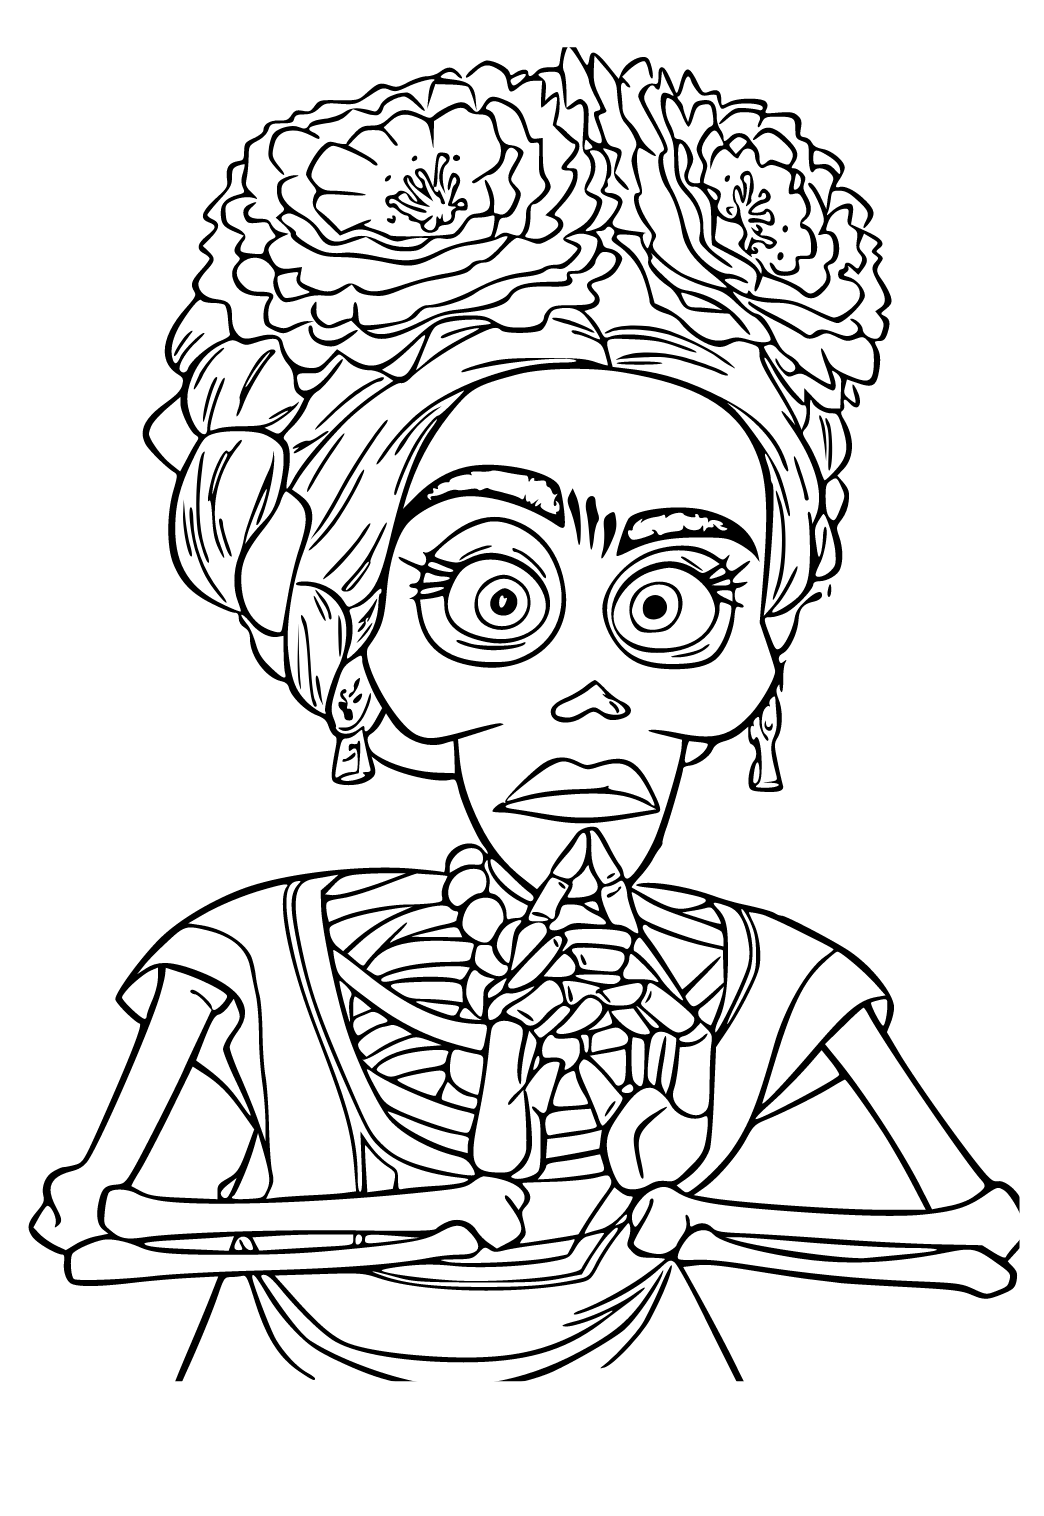 Free Printable Coco Frida Kahlo Coloring Page, Sheet and Picture for Adults  and Kids (Girls and Boys) - Babeled.com